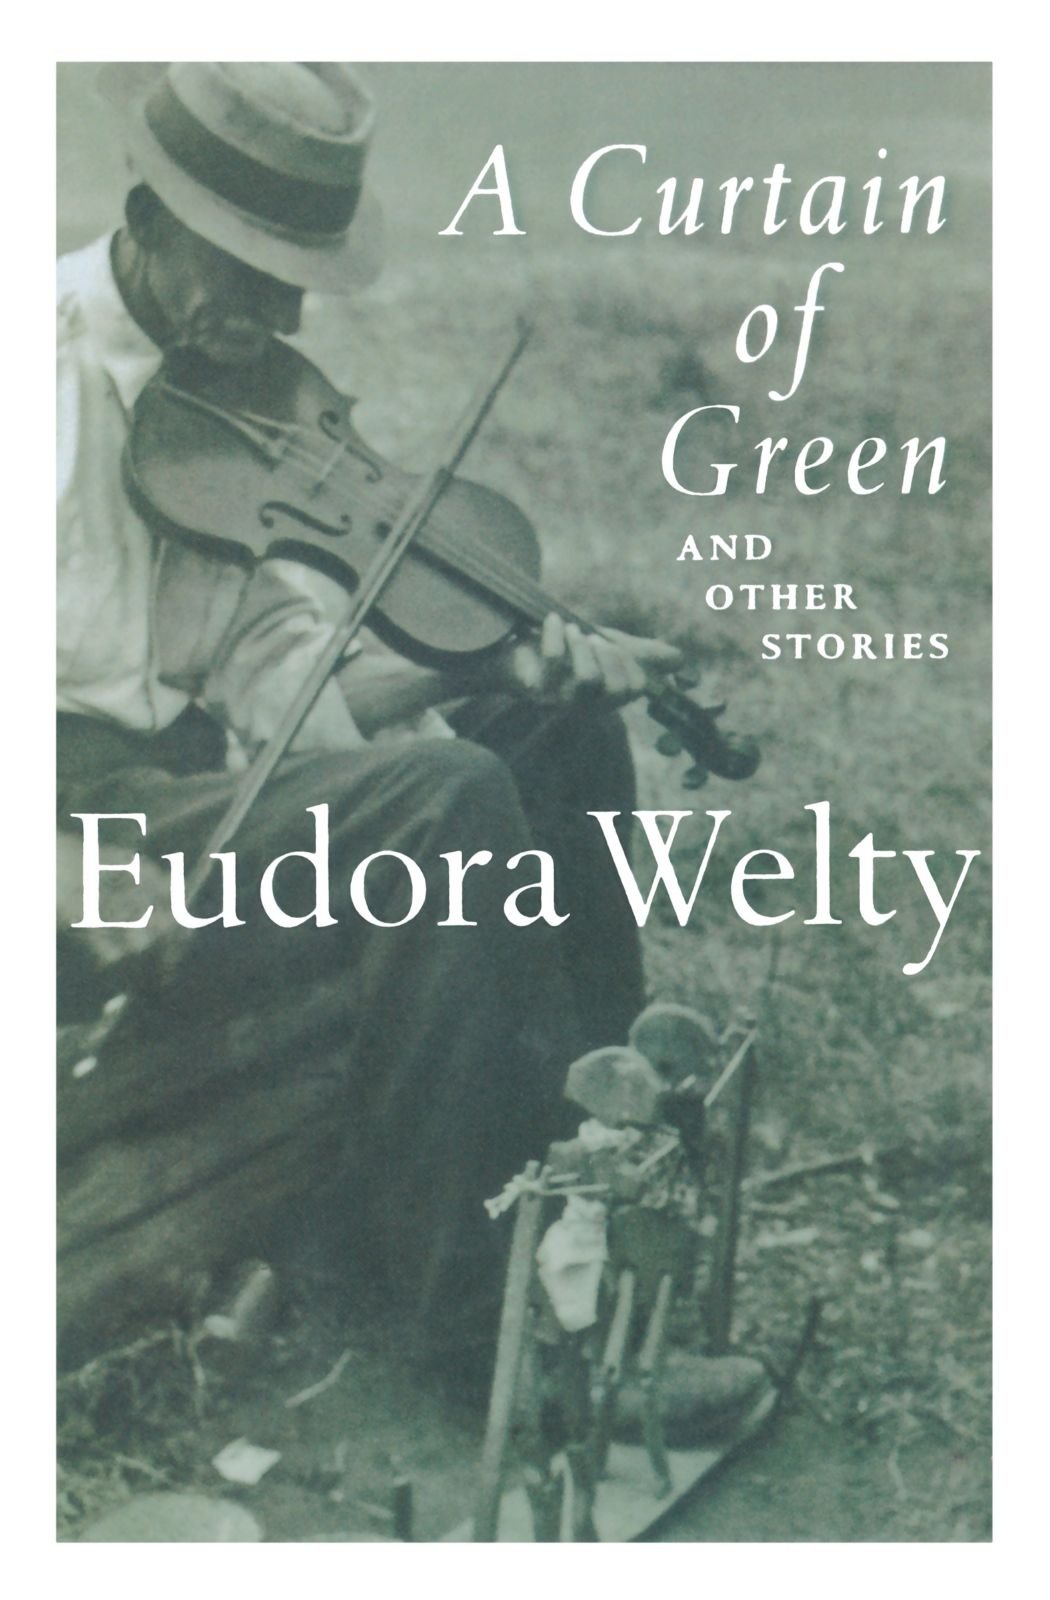 BOOK_Eudora-Welty-Curtain-of-Green